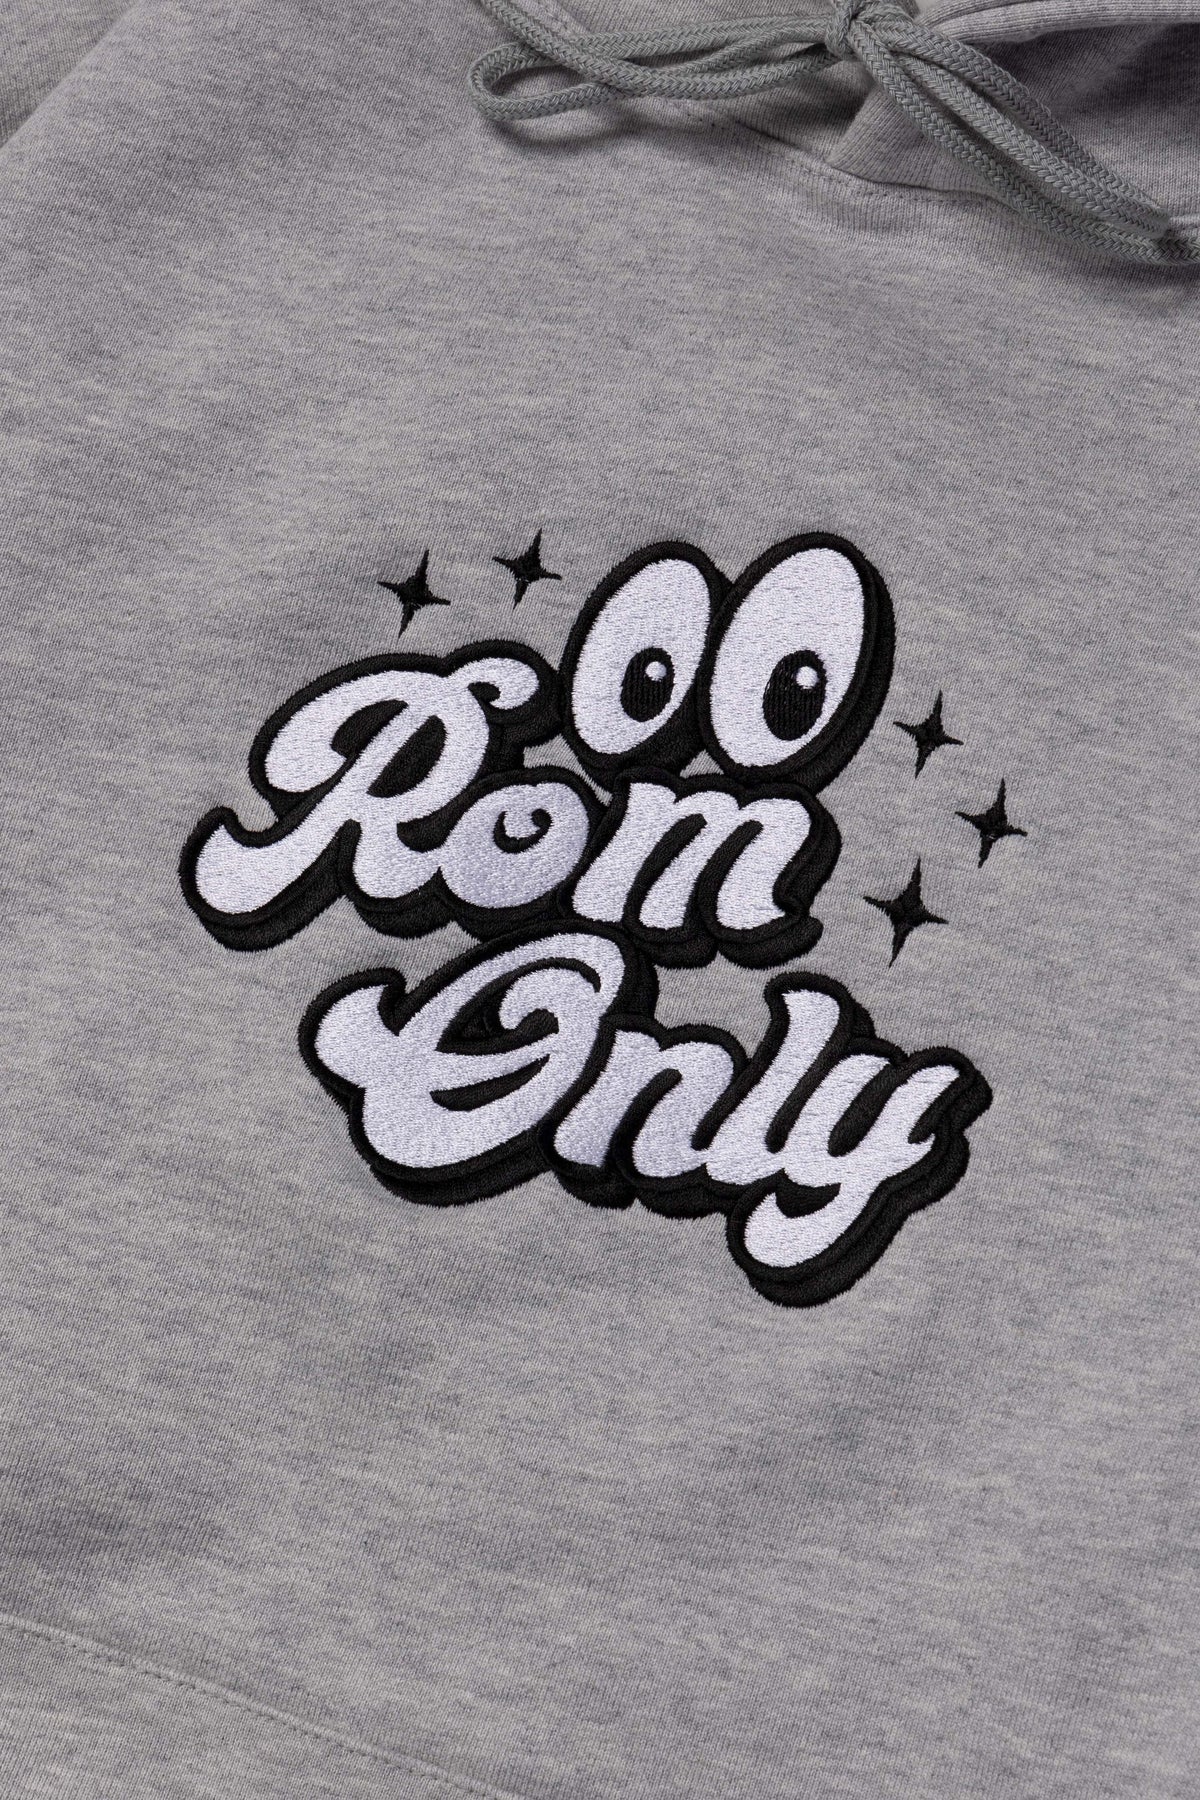 vaultroom ROM ONLY HOODIE / GRYサイズ公式サイトより